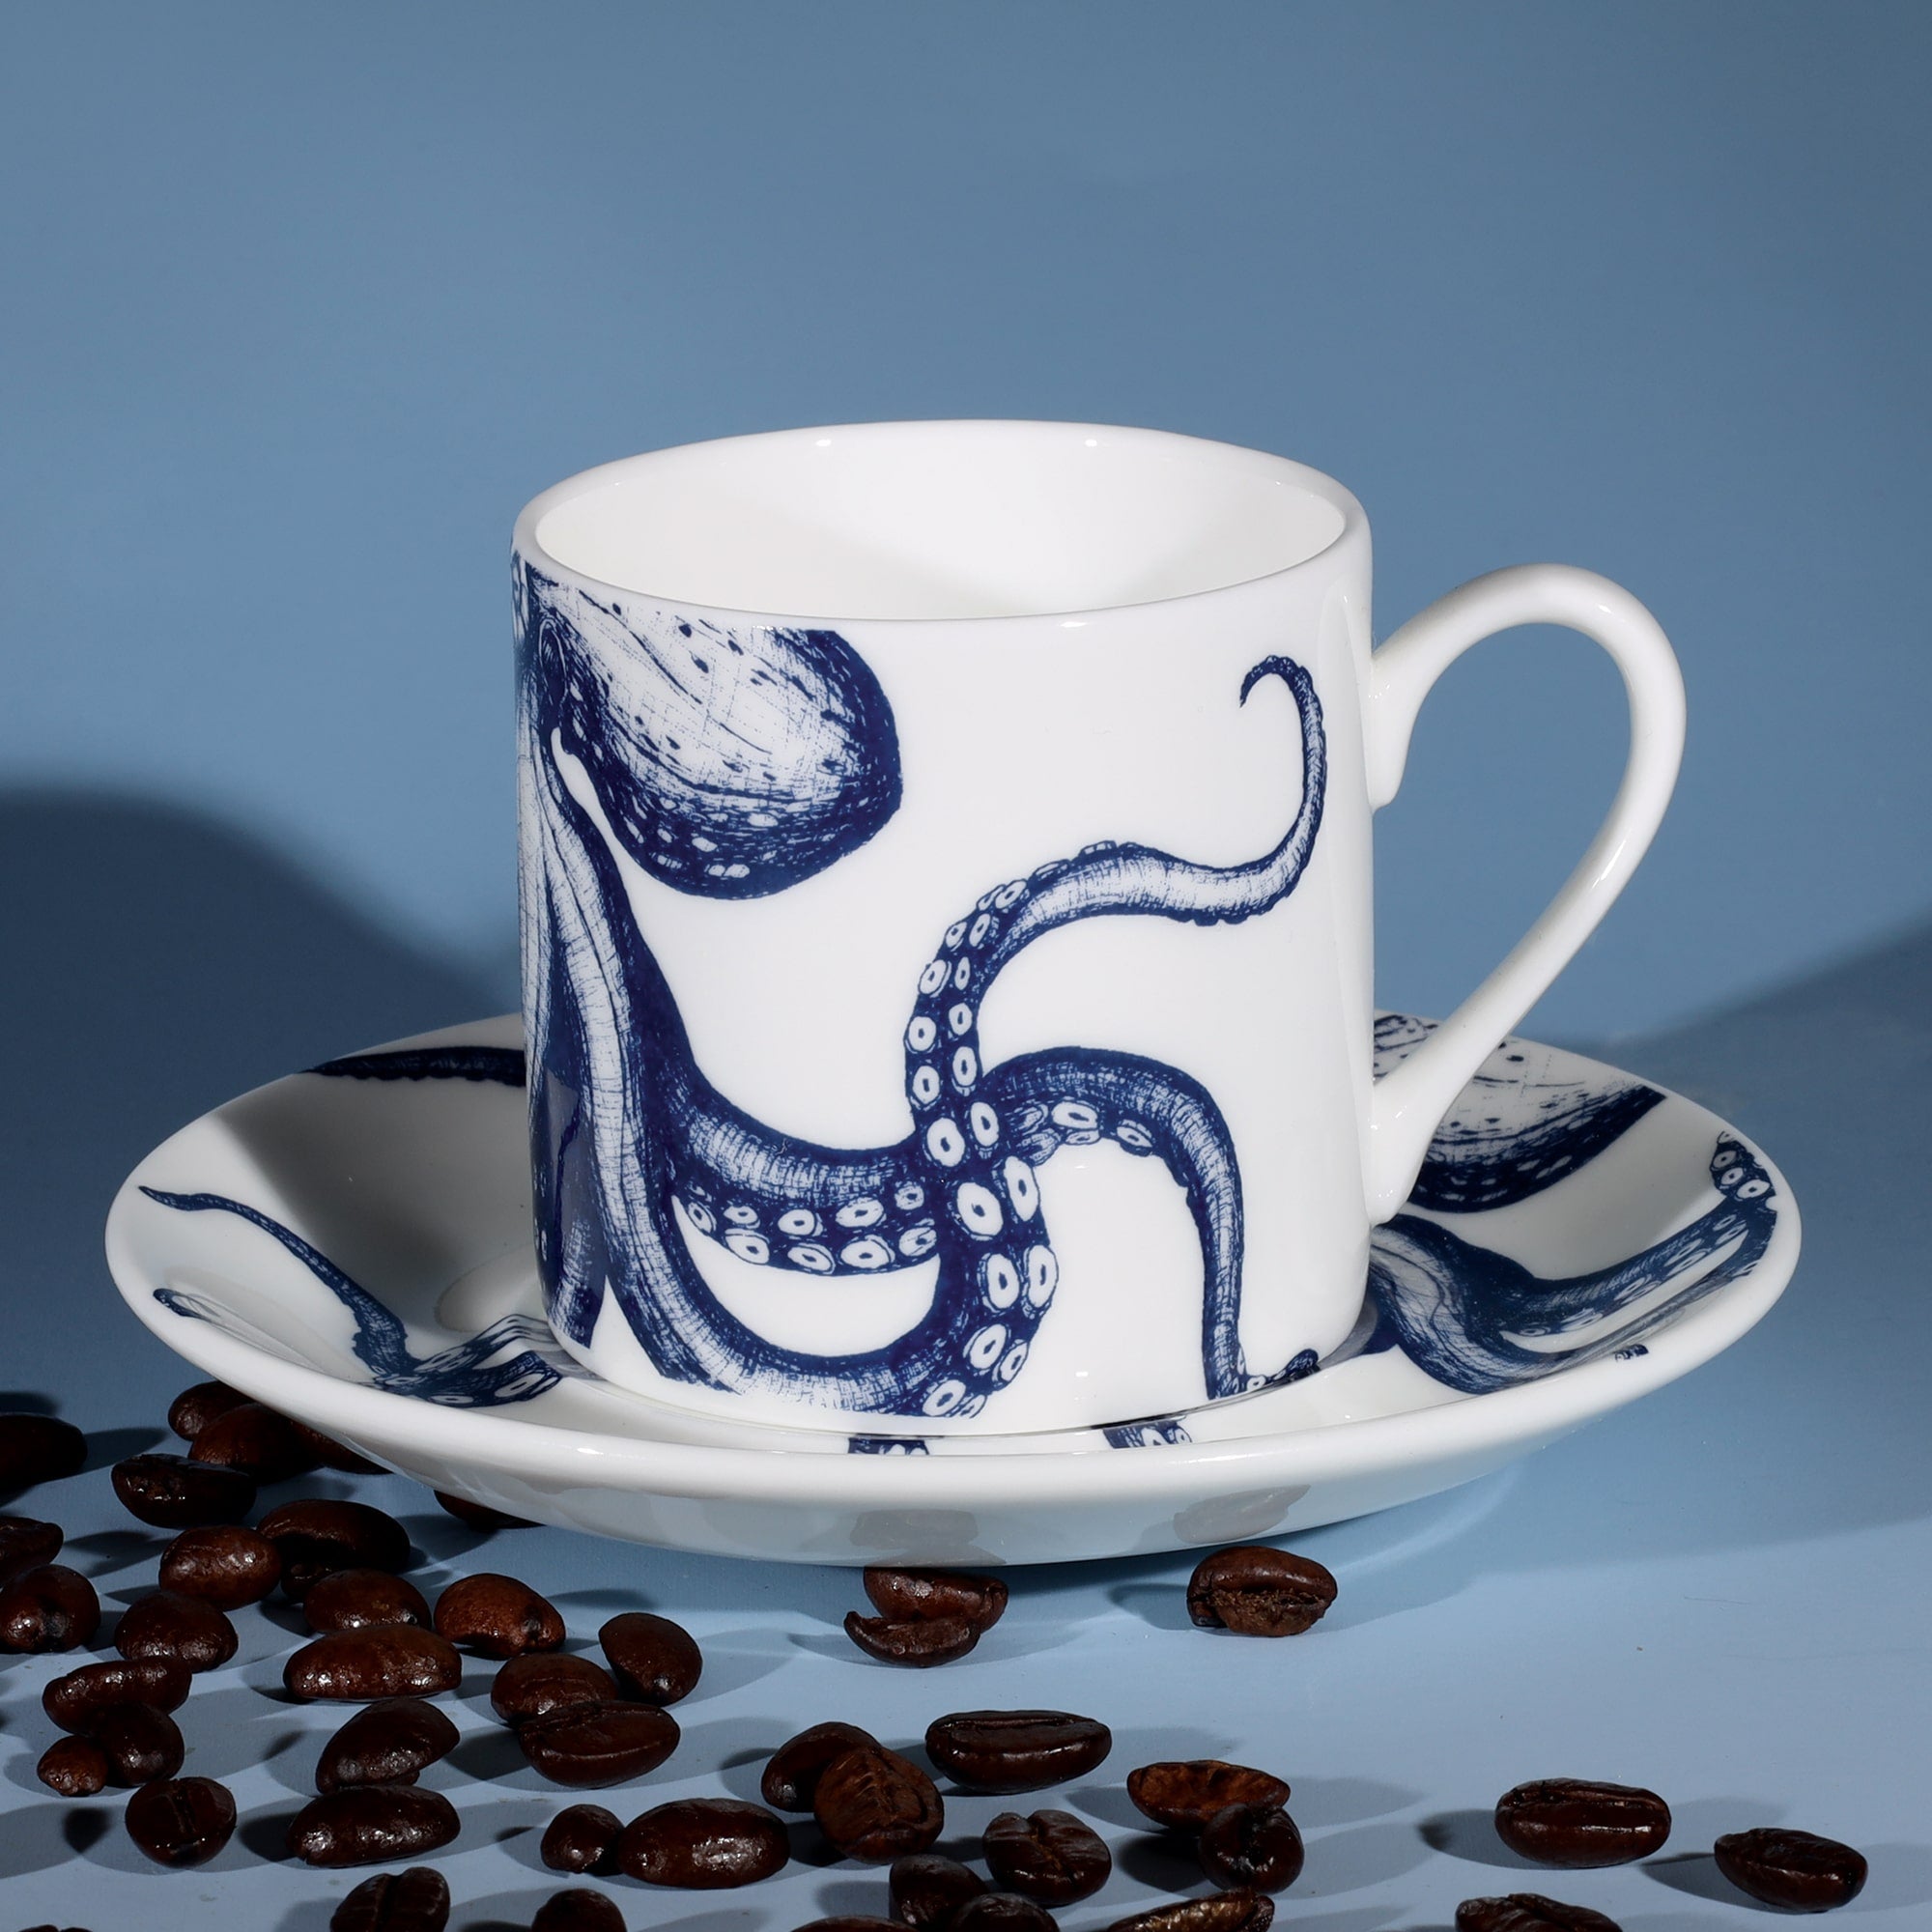 Bone China white espresso cup in hand drawn illustration in our Octopus design in Navy with matching saucer surrounded by coffee beans